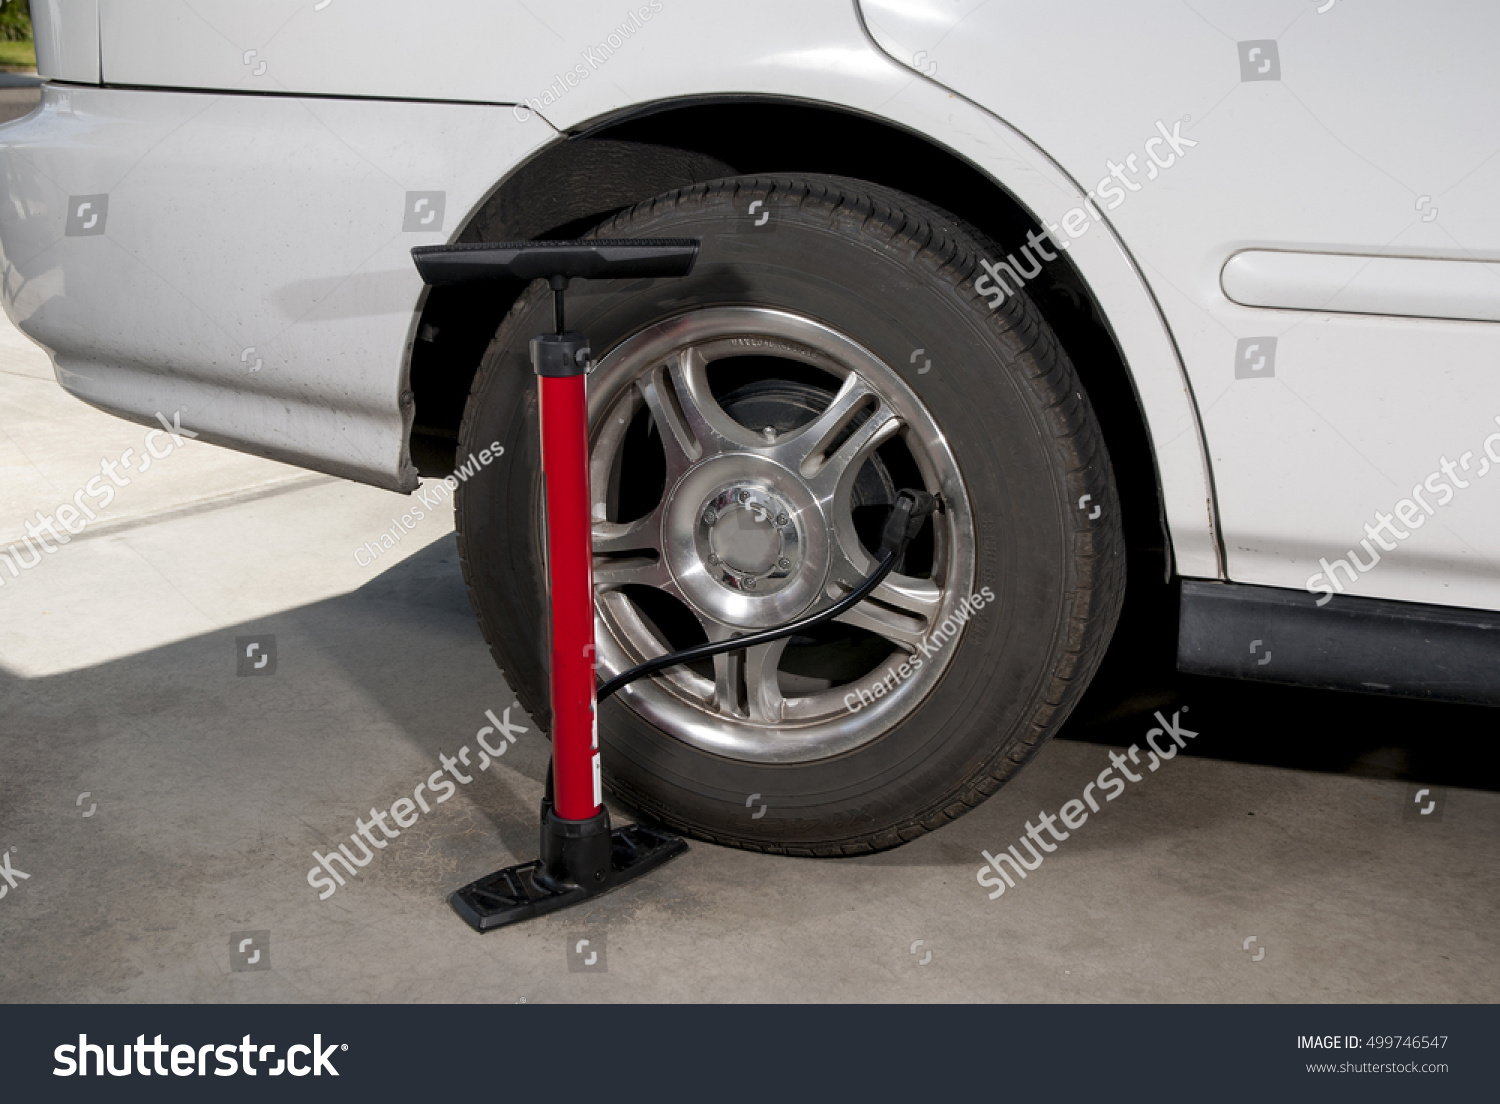 can you pump up a car tire with a bike pump